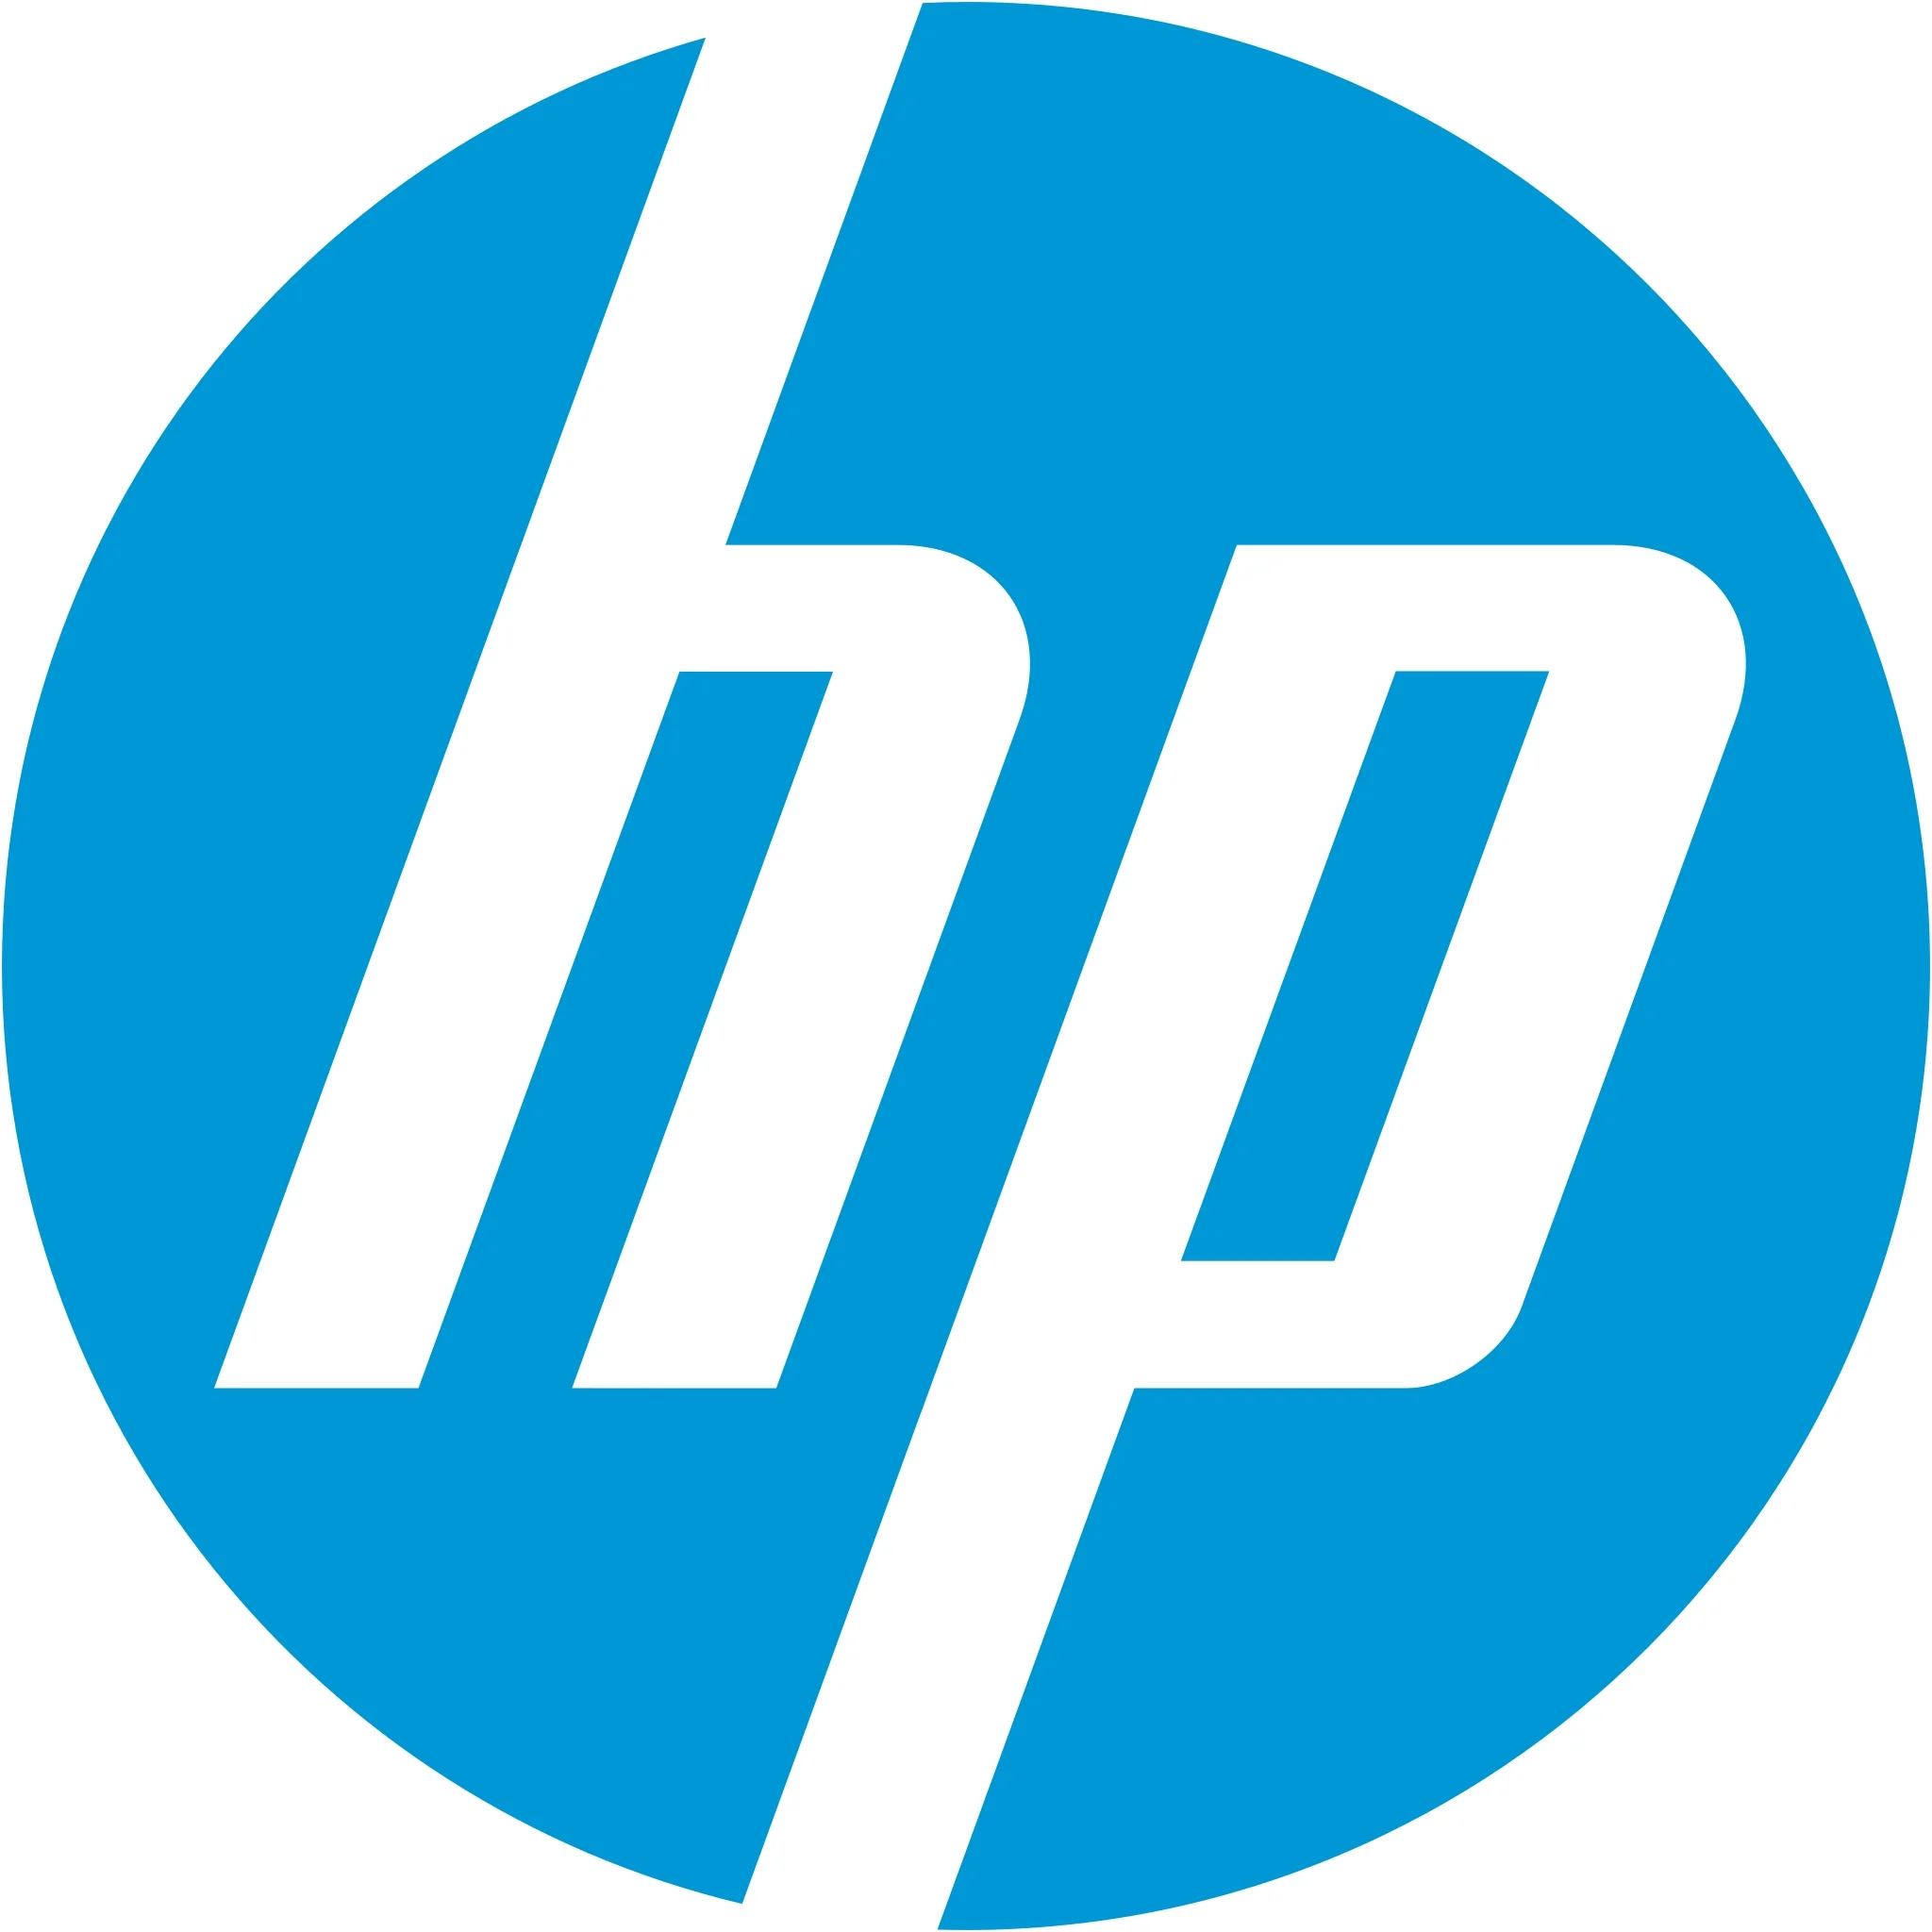 Hp Promo Code: Get 10% Off Your Laptops